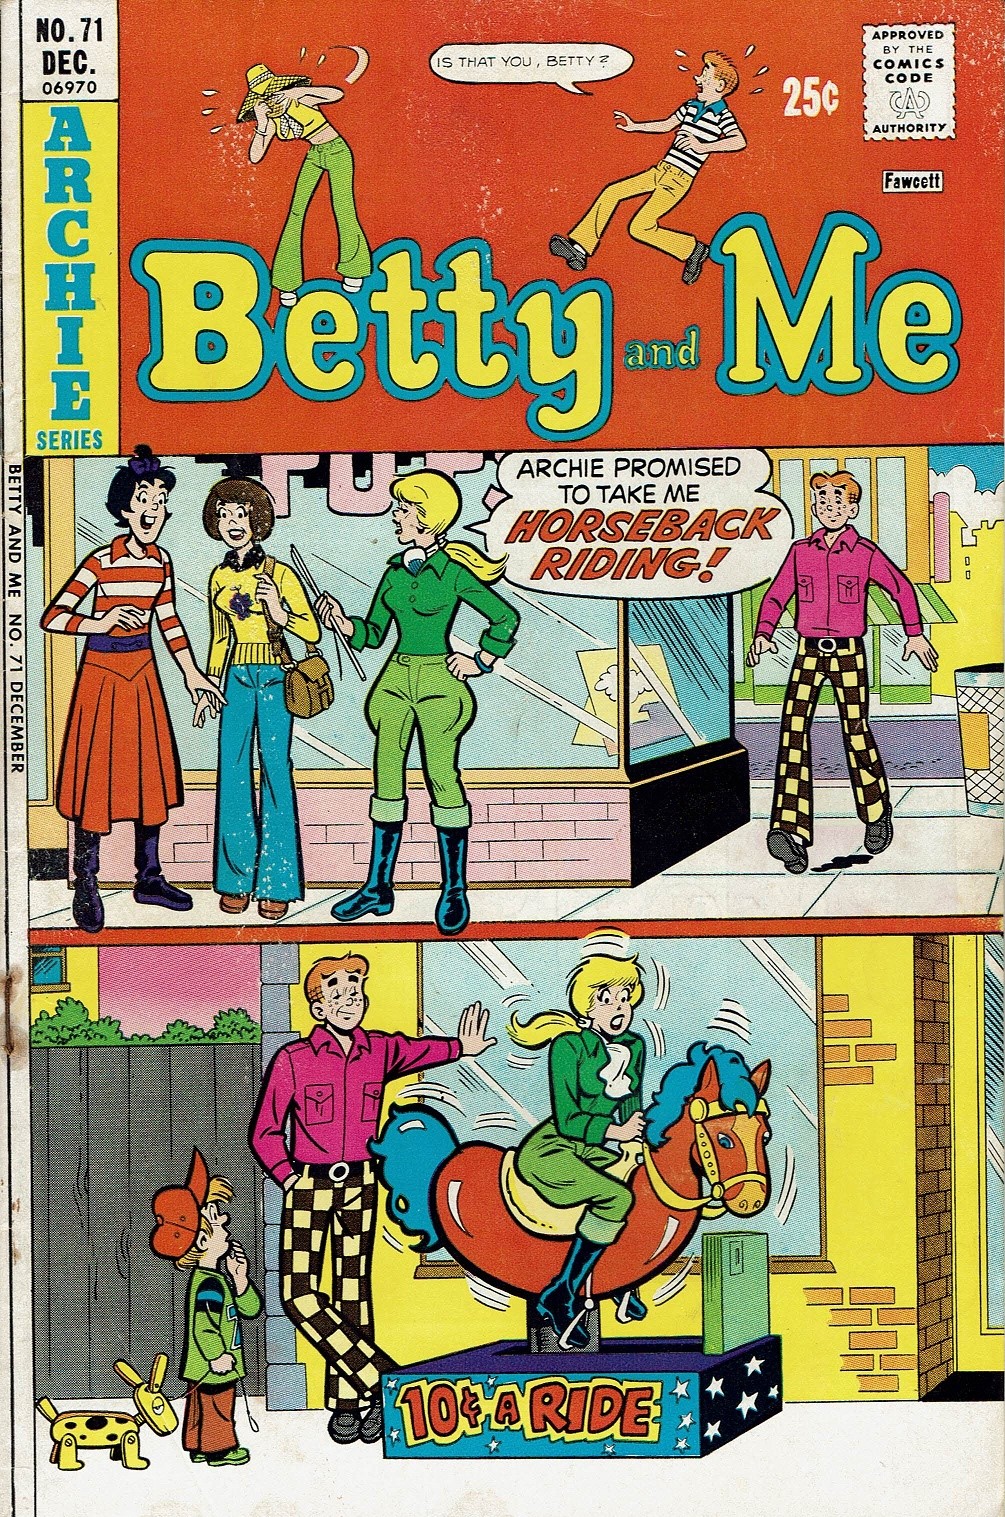 Read online Betty and Me comic -  Issue #71 - 1